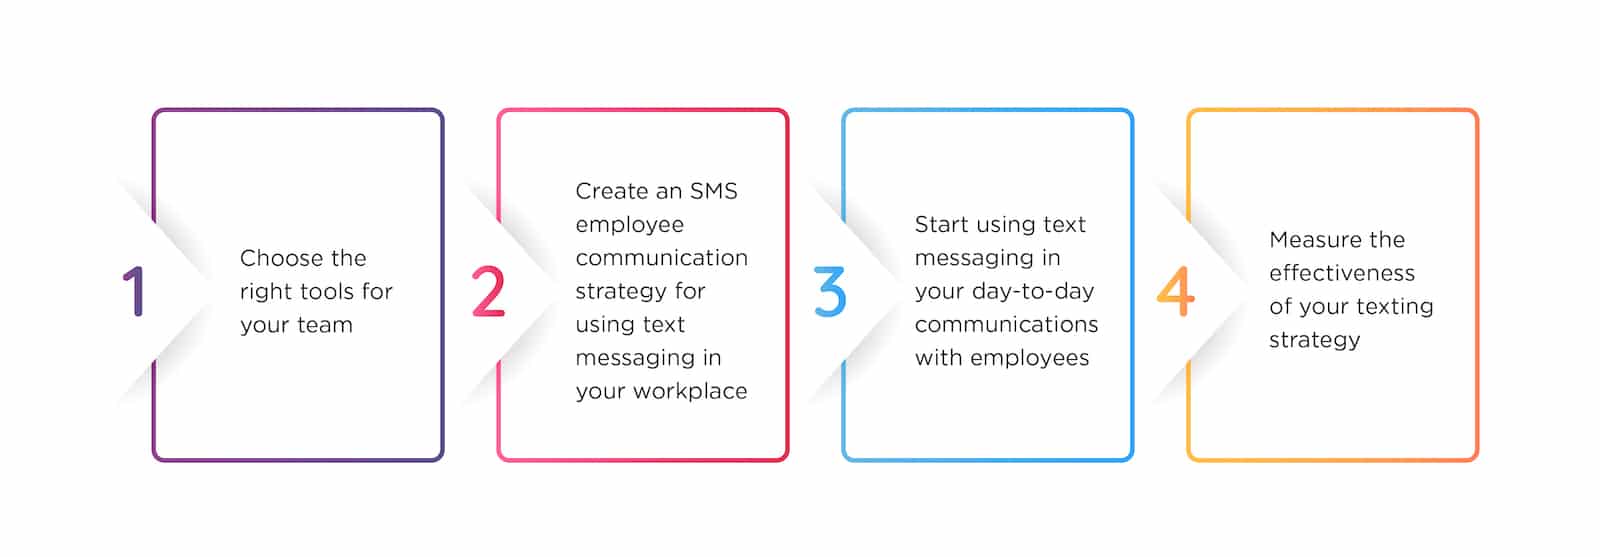 Steps to get started with SMS at work